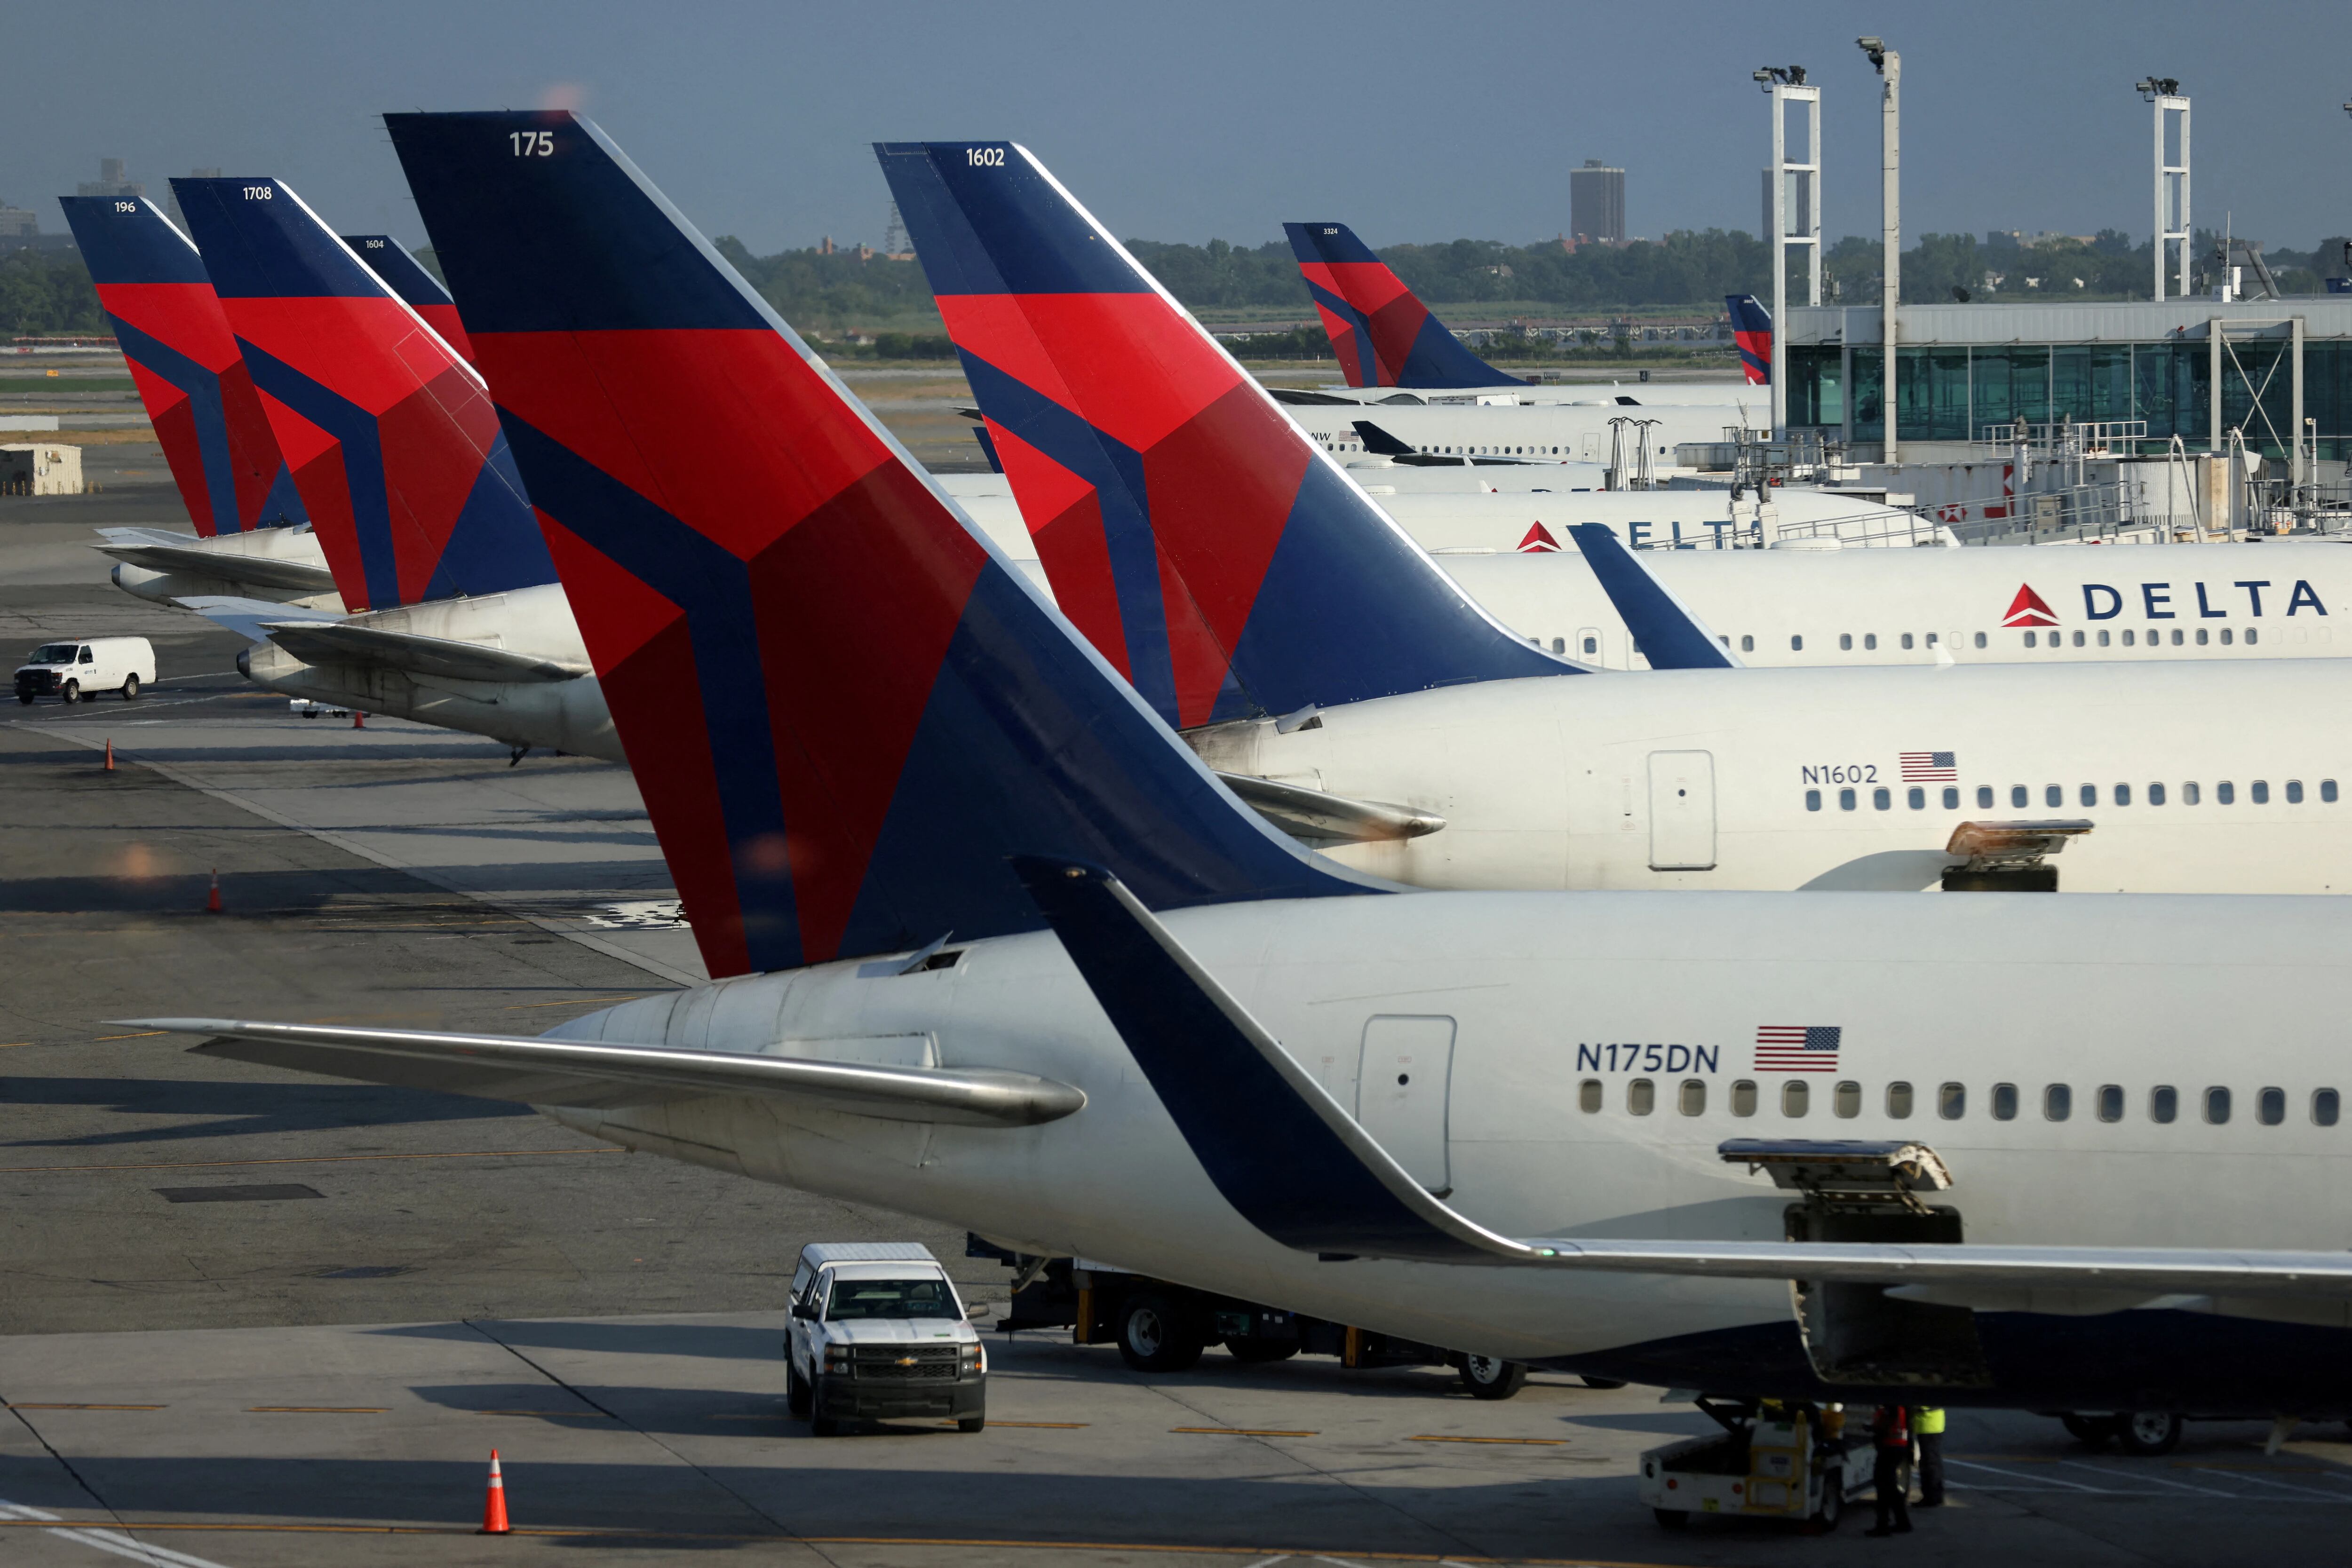 This is your captain speaking: Delta Air Lines becomes first company to integrate brand with LA28 logo